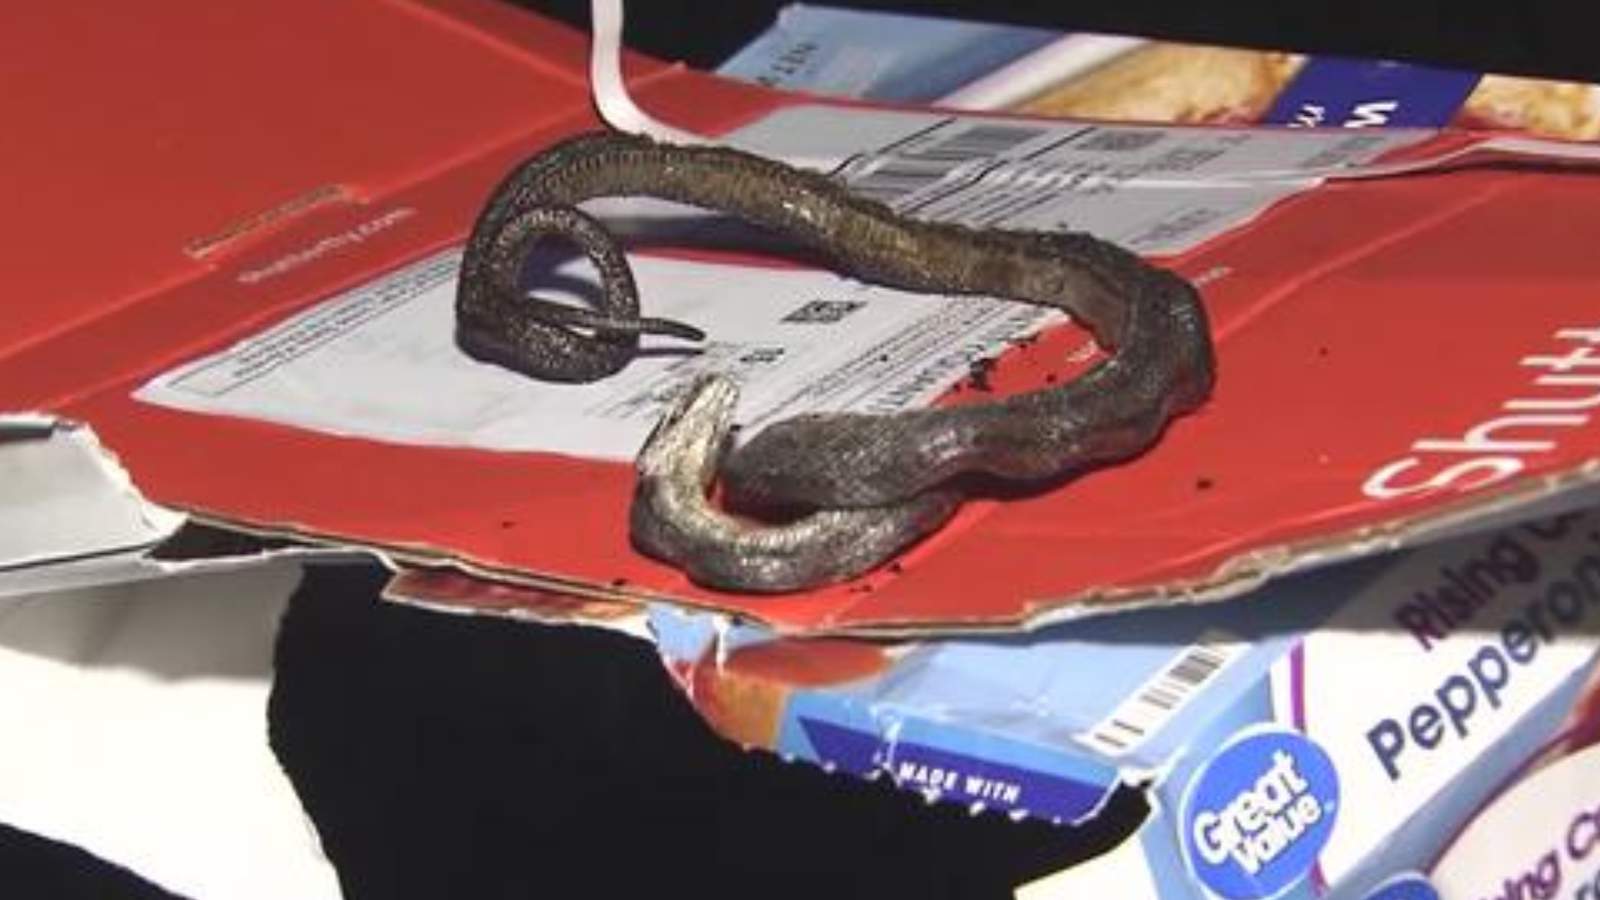 Video: Family cooks snake in oven with pizza